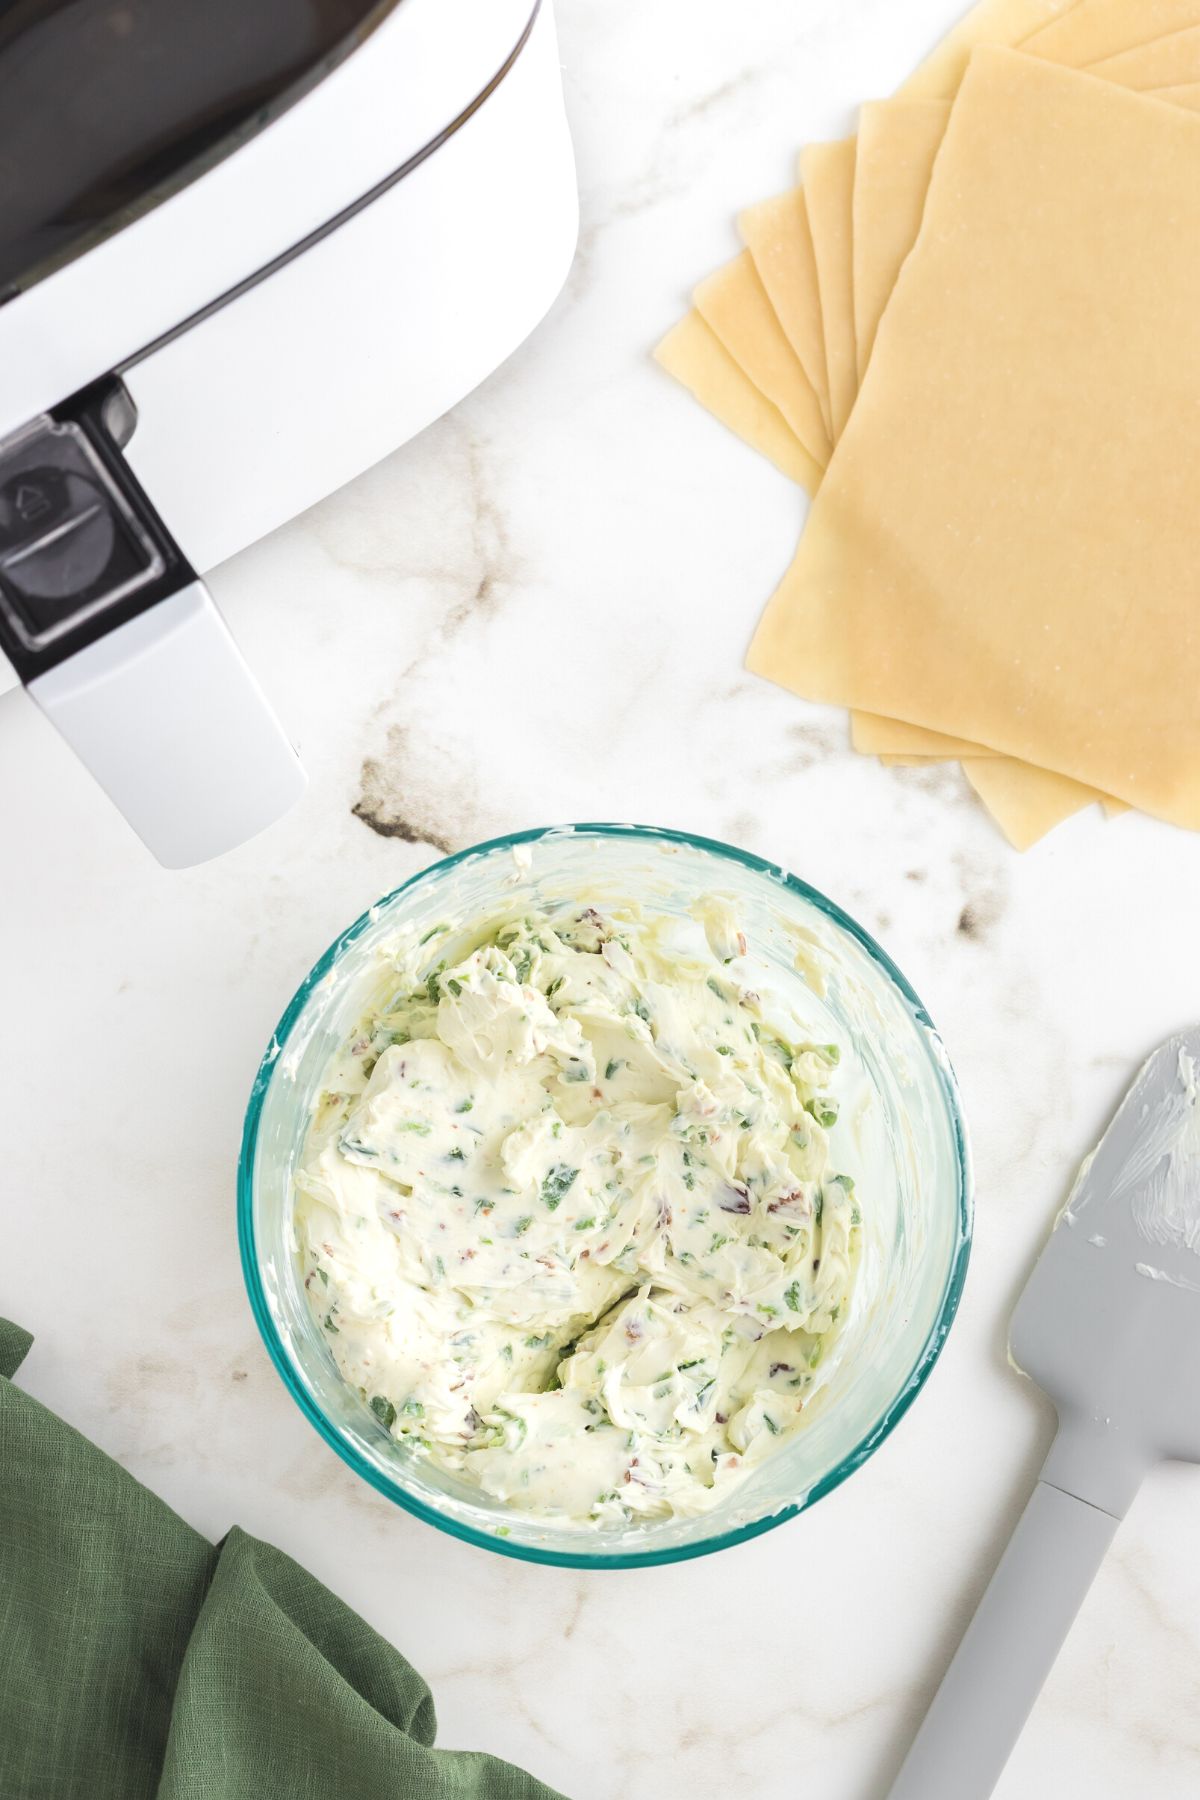 Cream cheese and chopped jalapenos mixed together in a clear glass bowl.